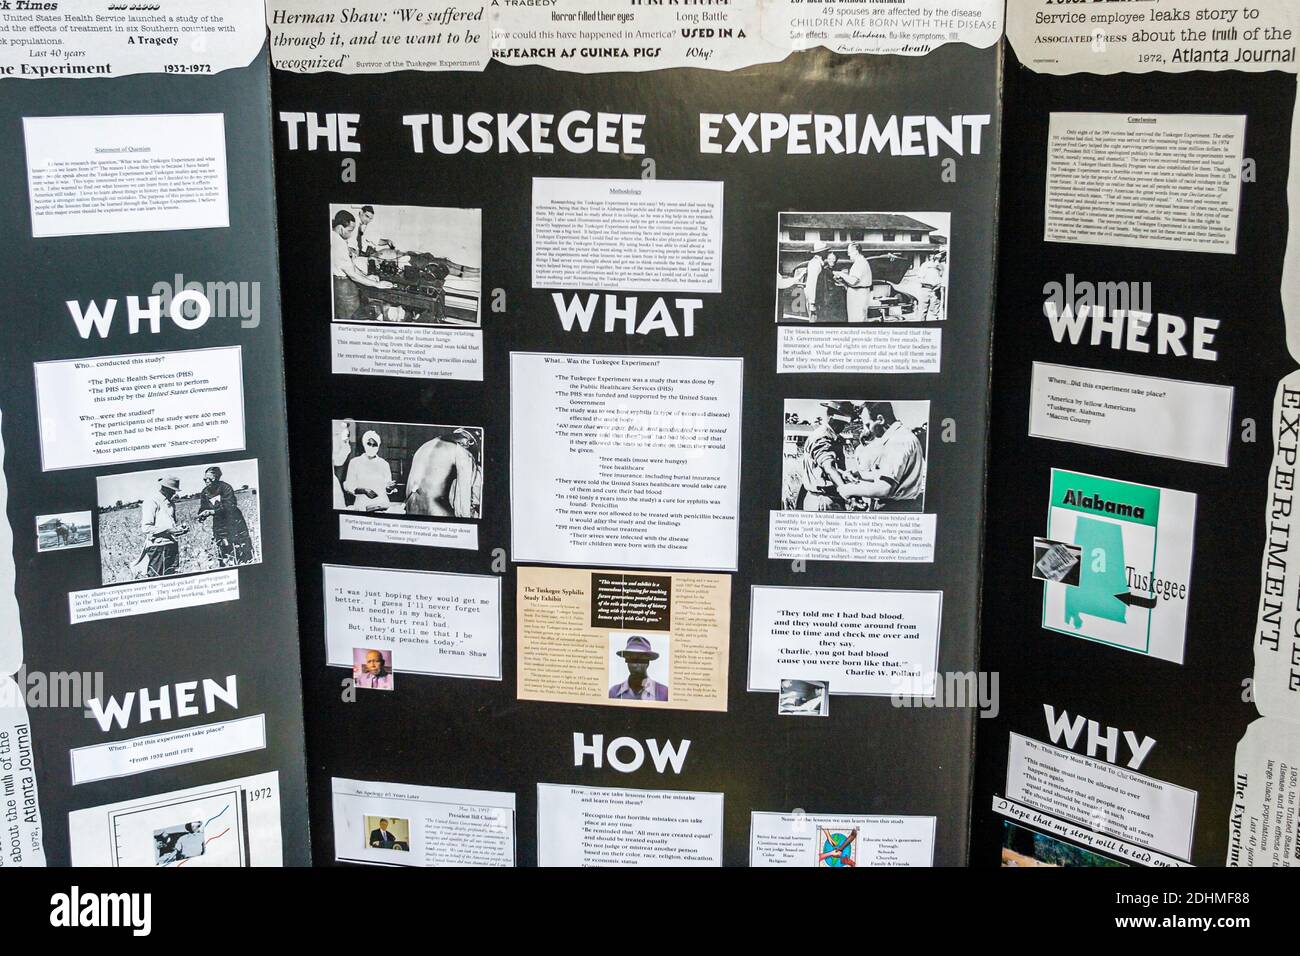 Alabama Tuskegee Human & Civil Rights Multicultural Center centre,Tuskegee Syphilis Study Experiment exhibit, Stock Photo